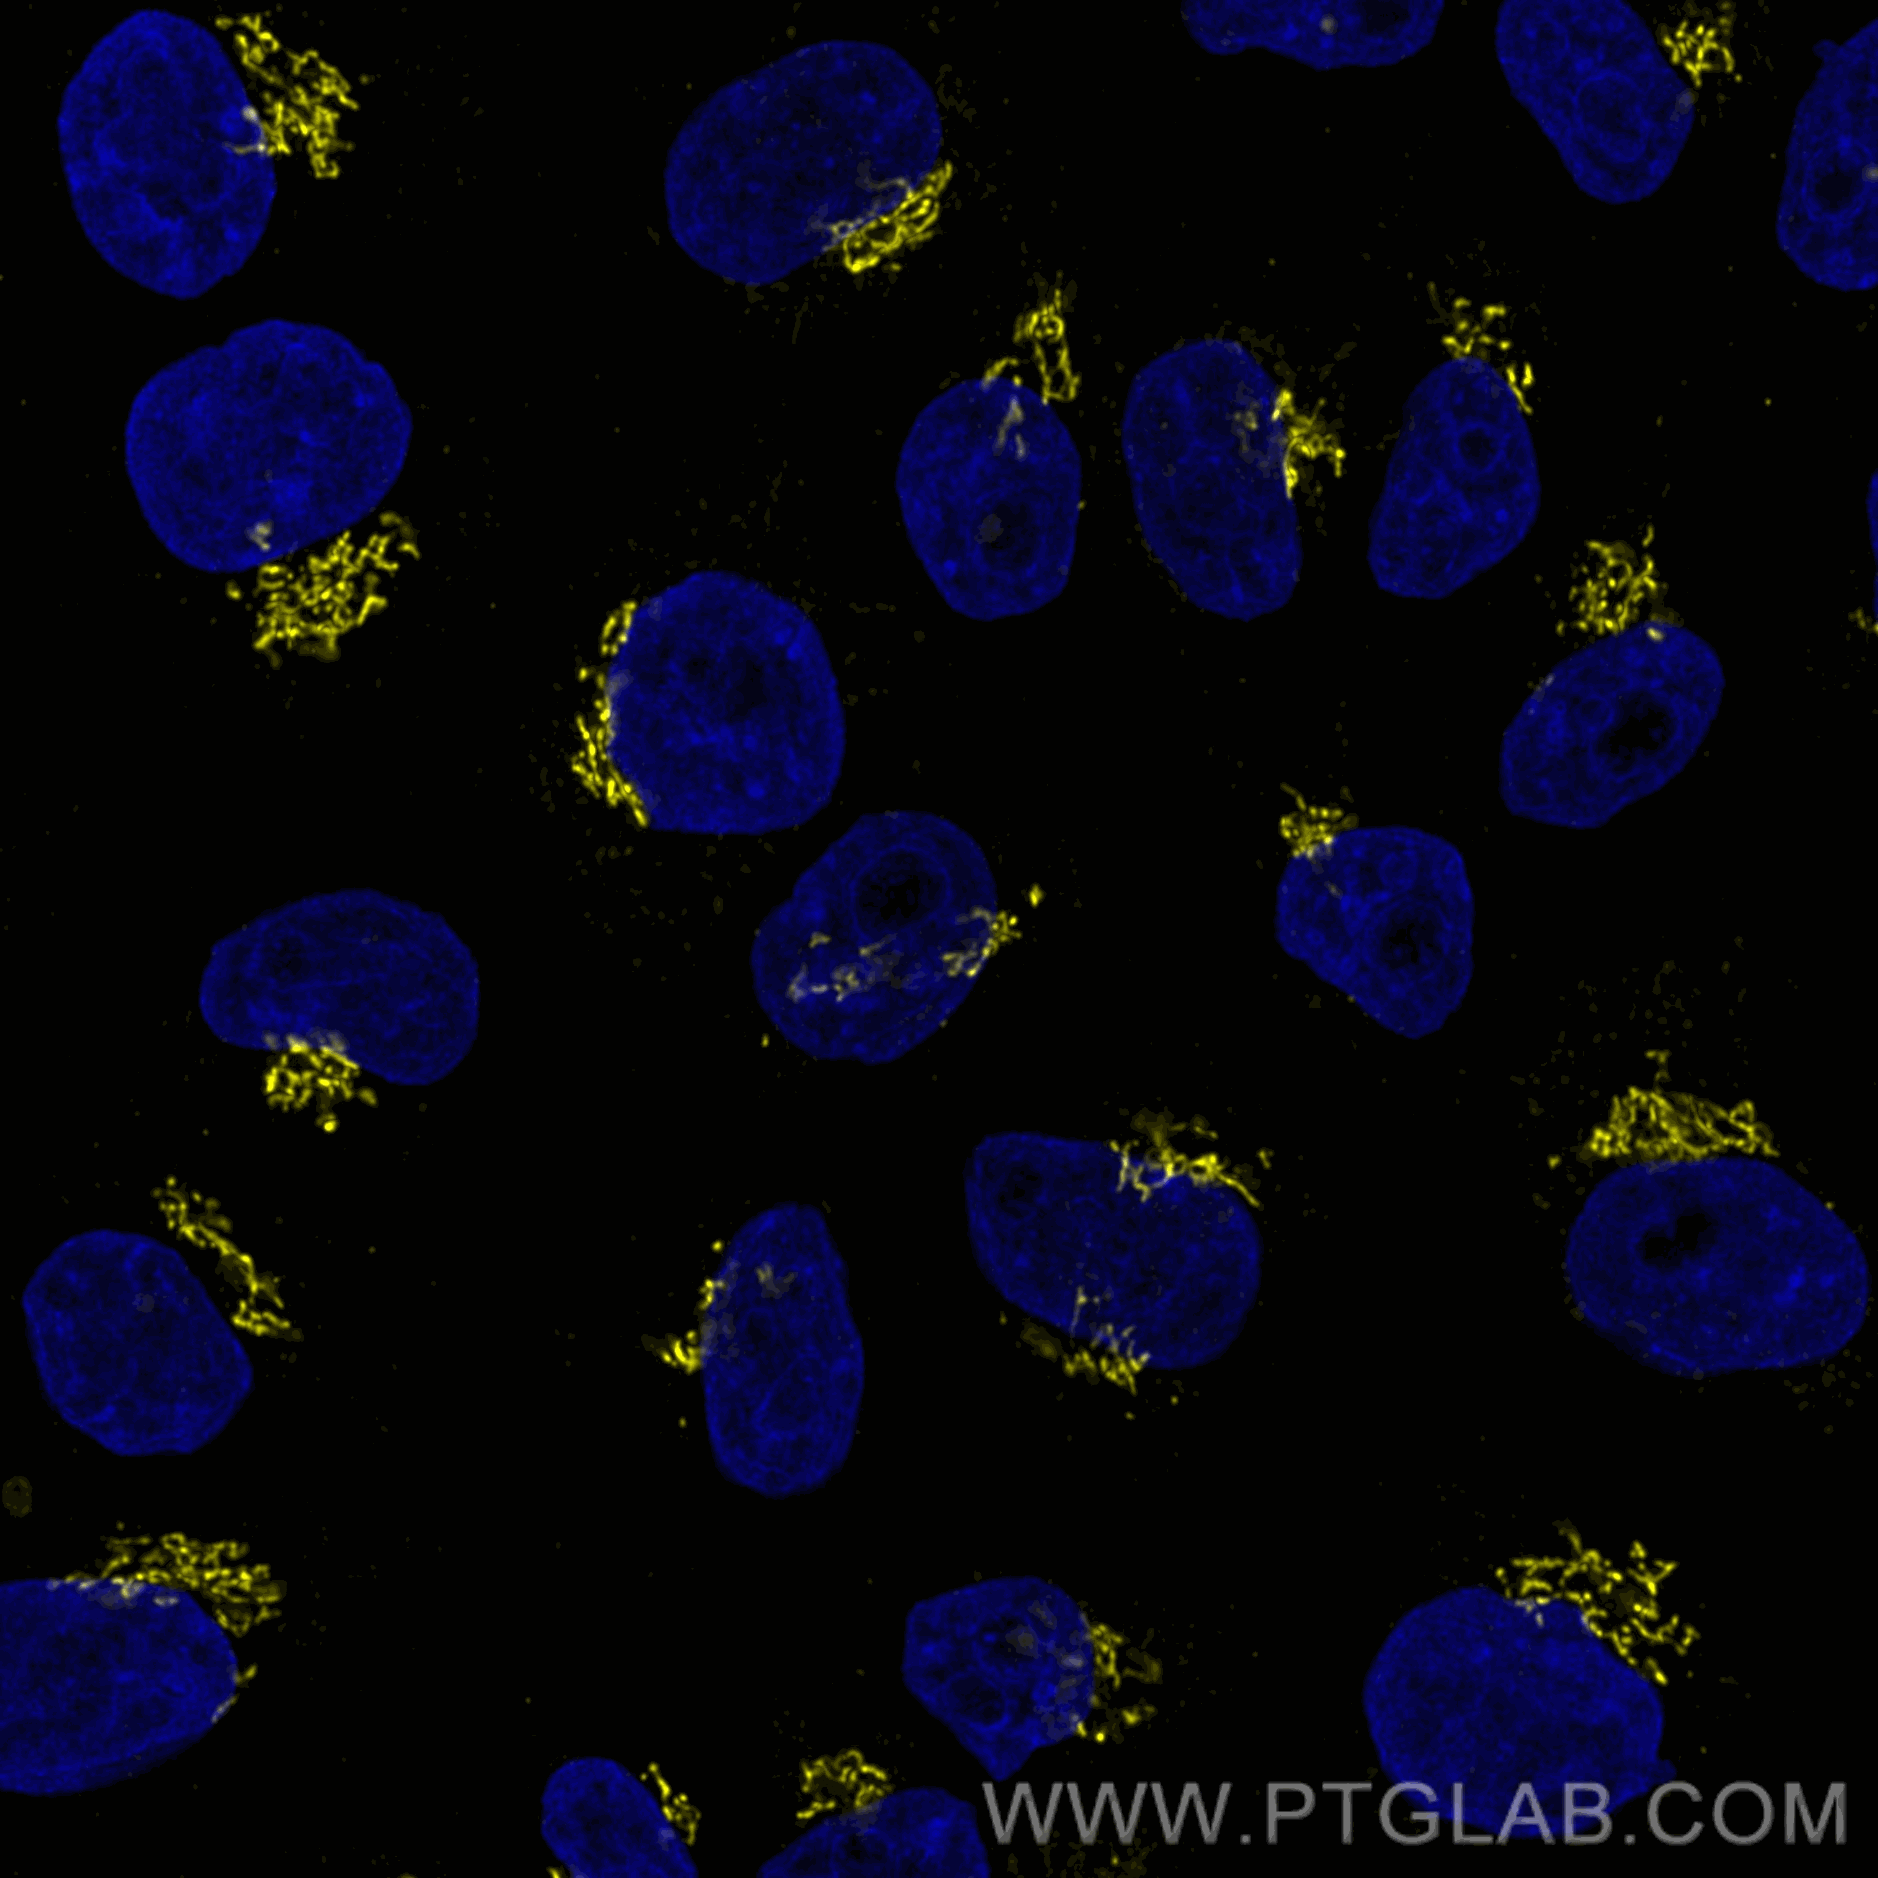 Immunofluorescence of HeLa: PFA-fixed HeLa cells were stained with anti-GM130 (11308-1-AP) labeled with FlexAble Biotin Kit for Rabbit IgG (KFA007) and Streptavidin-ATTO594​ (yellow). Nuclei are stained with DAPI (blue). Confocal images were acquired with a 100x oil objective and post-processed. Images were recorded at the Core Facility Bioimaging at the Biomedical Center, LMU Munich.